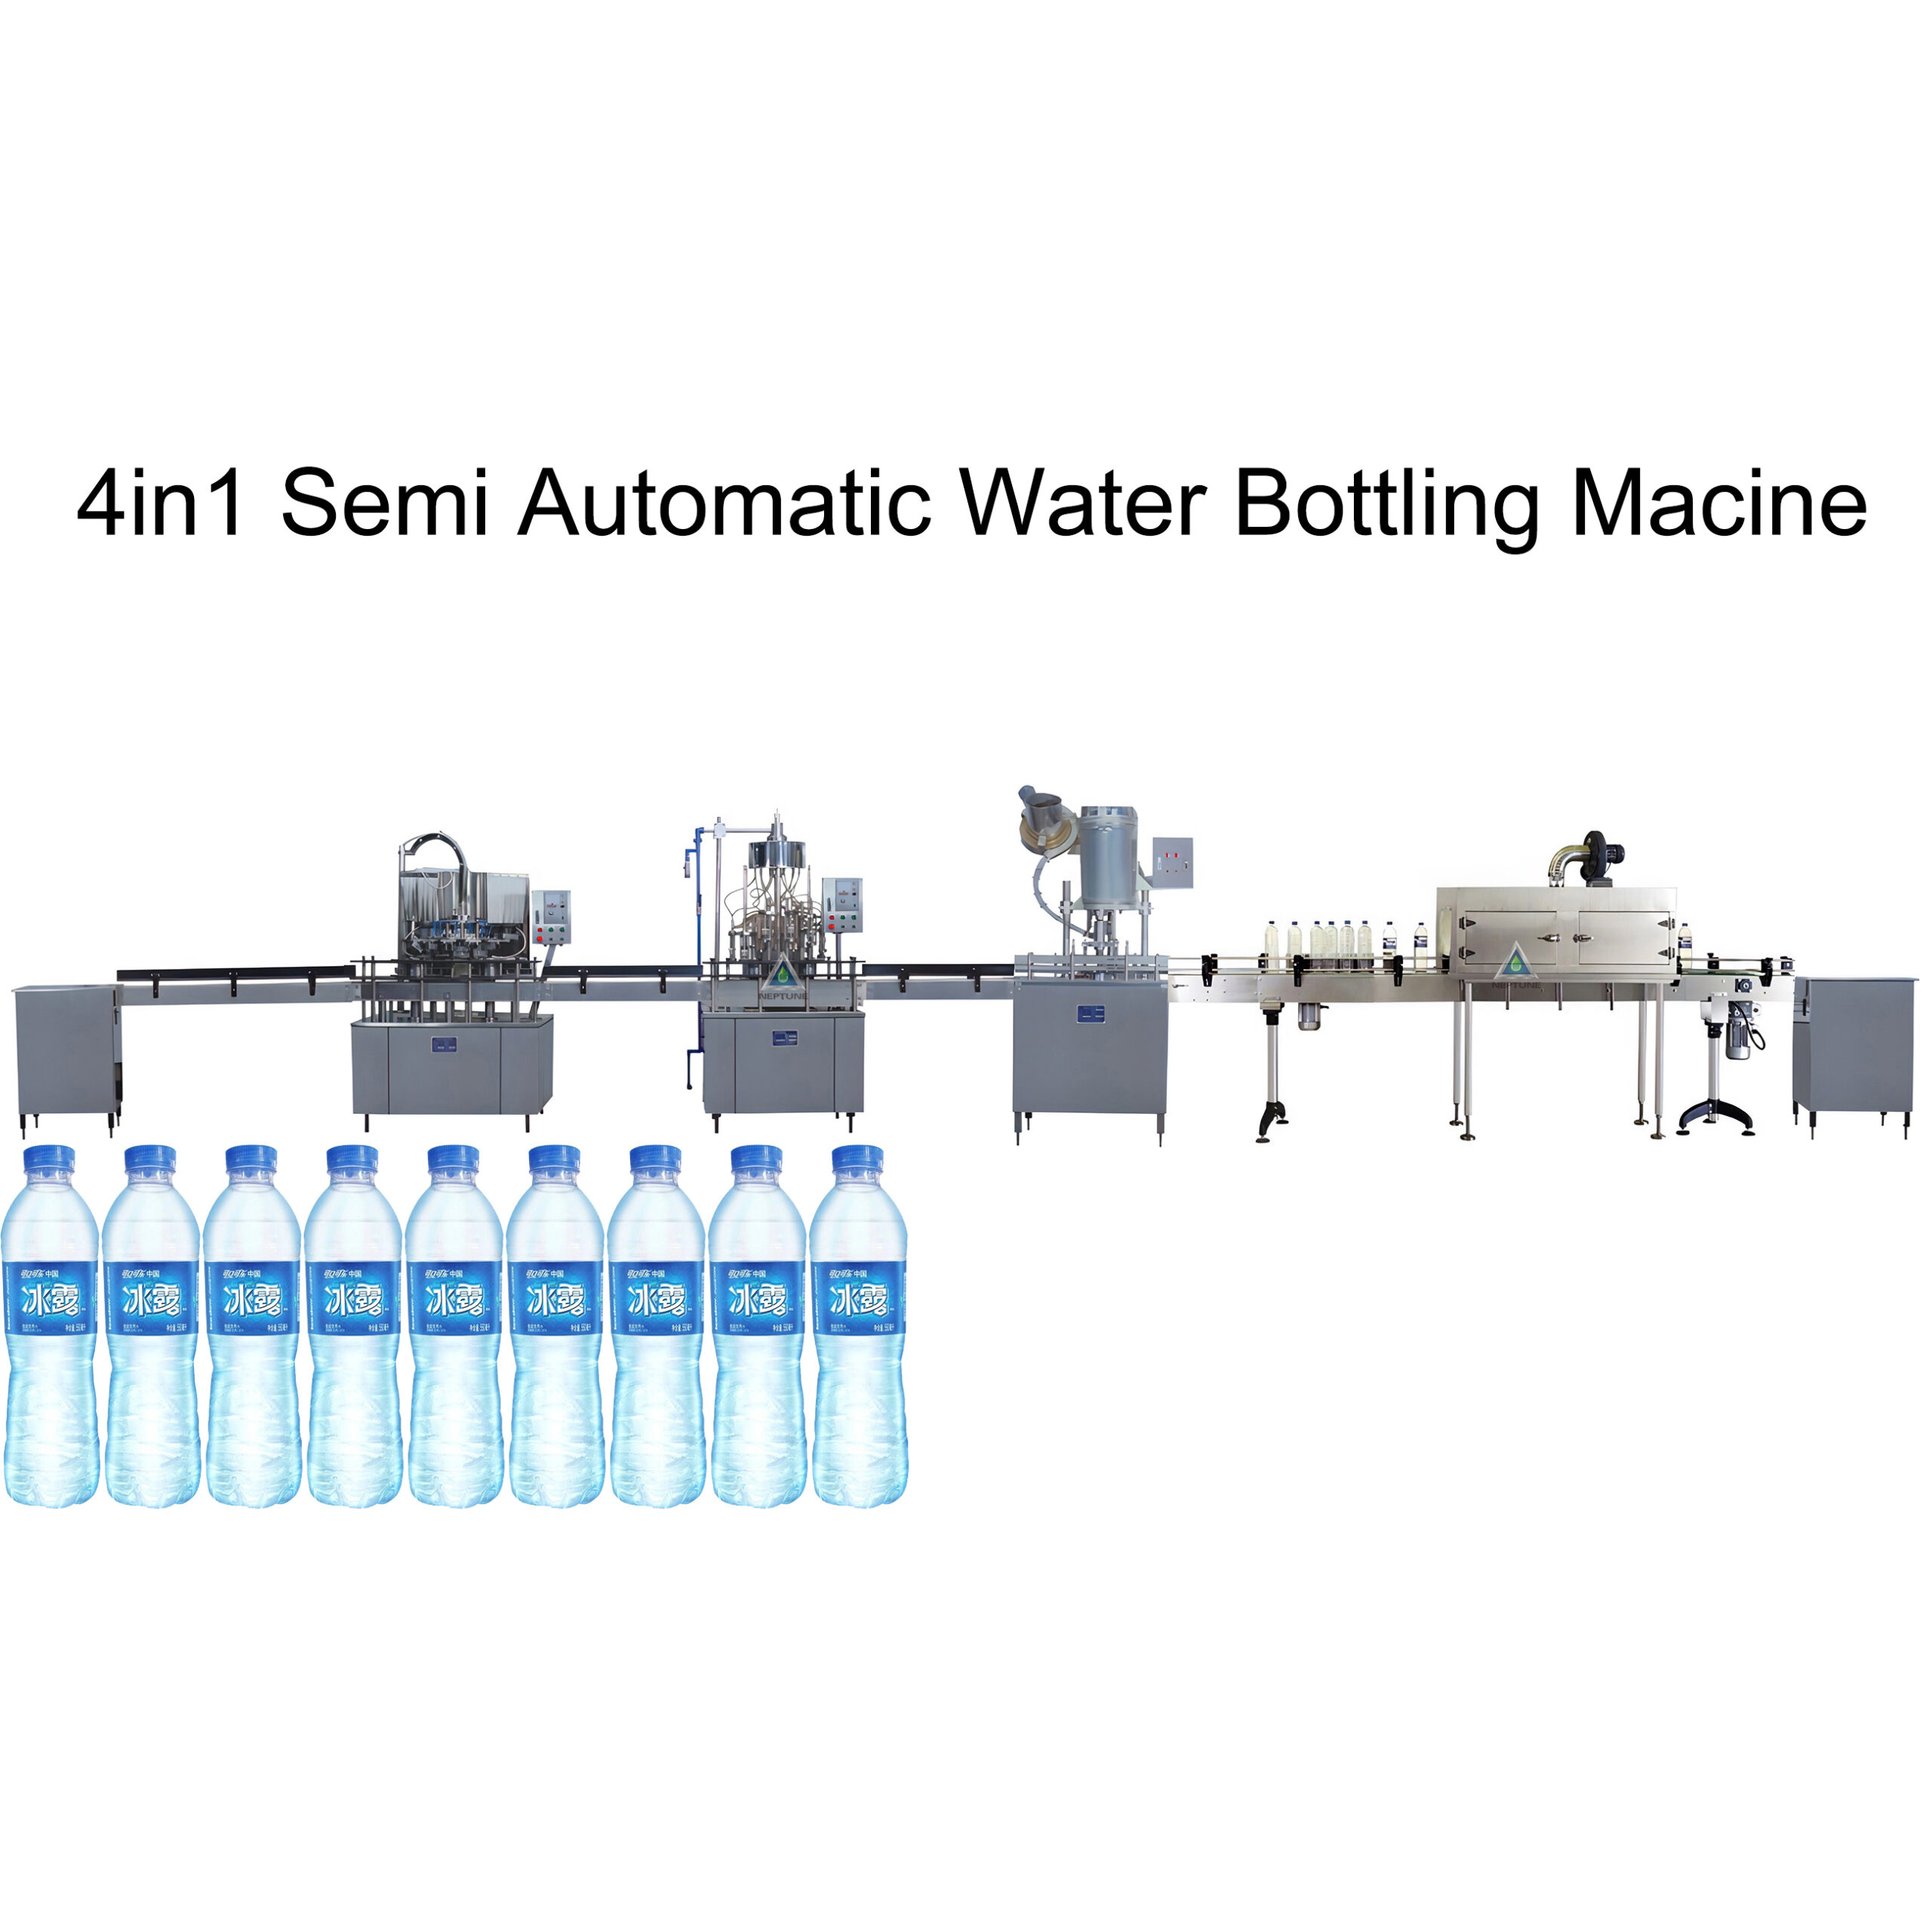 4in1 Semi Automatic Water Bottling Machine With bottled water scaled